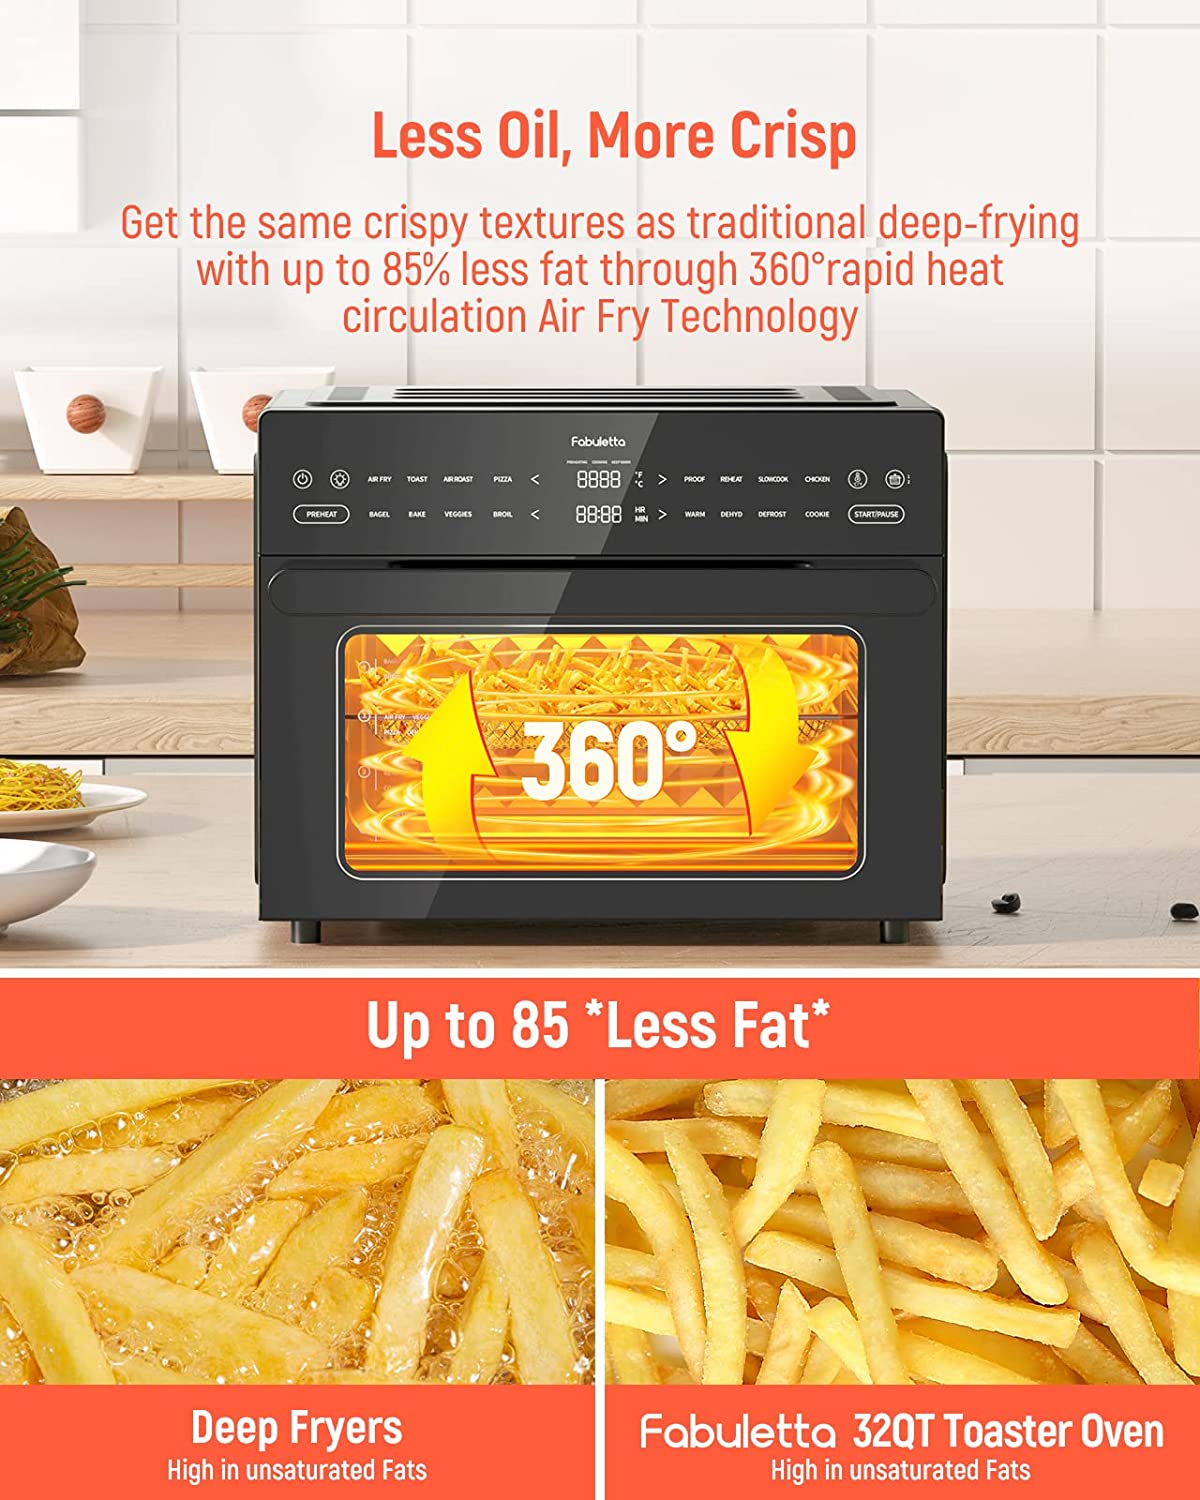 This Oster Toaster Oven doubles as an air fryer for $80 (Reg. up